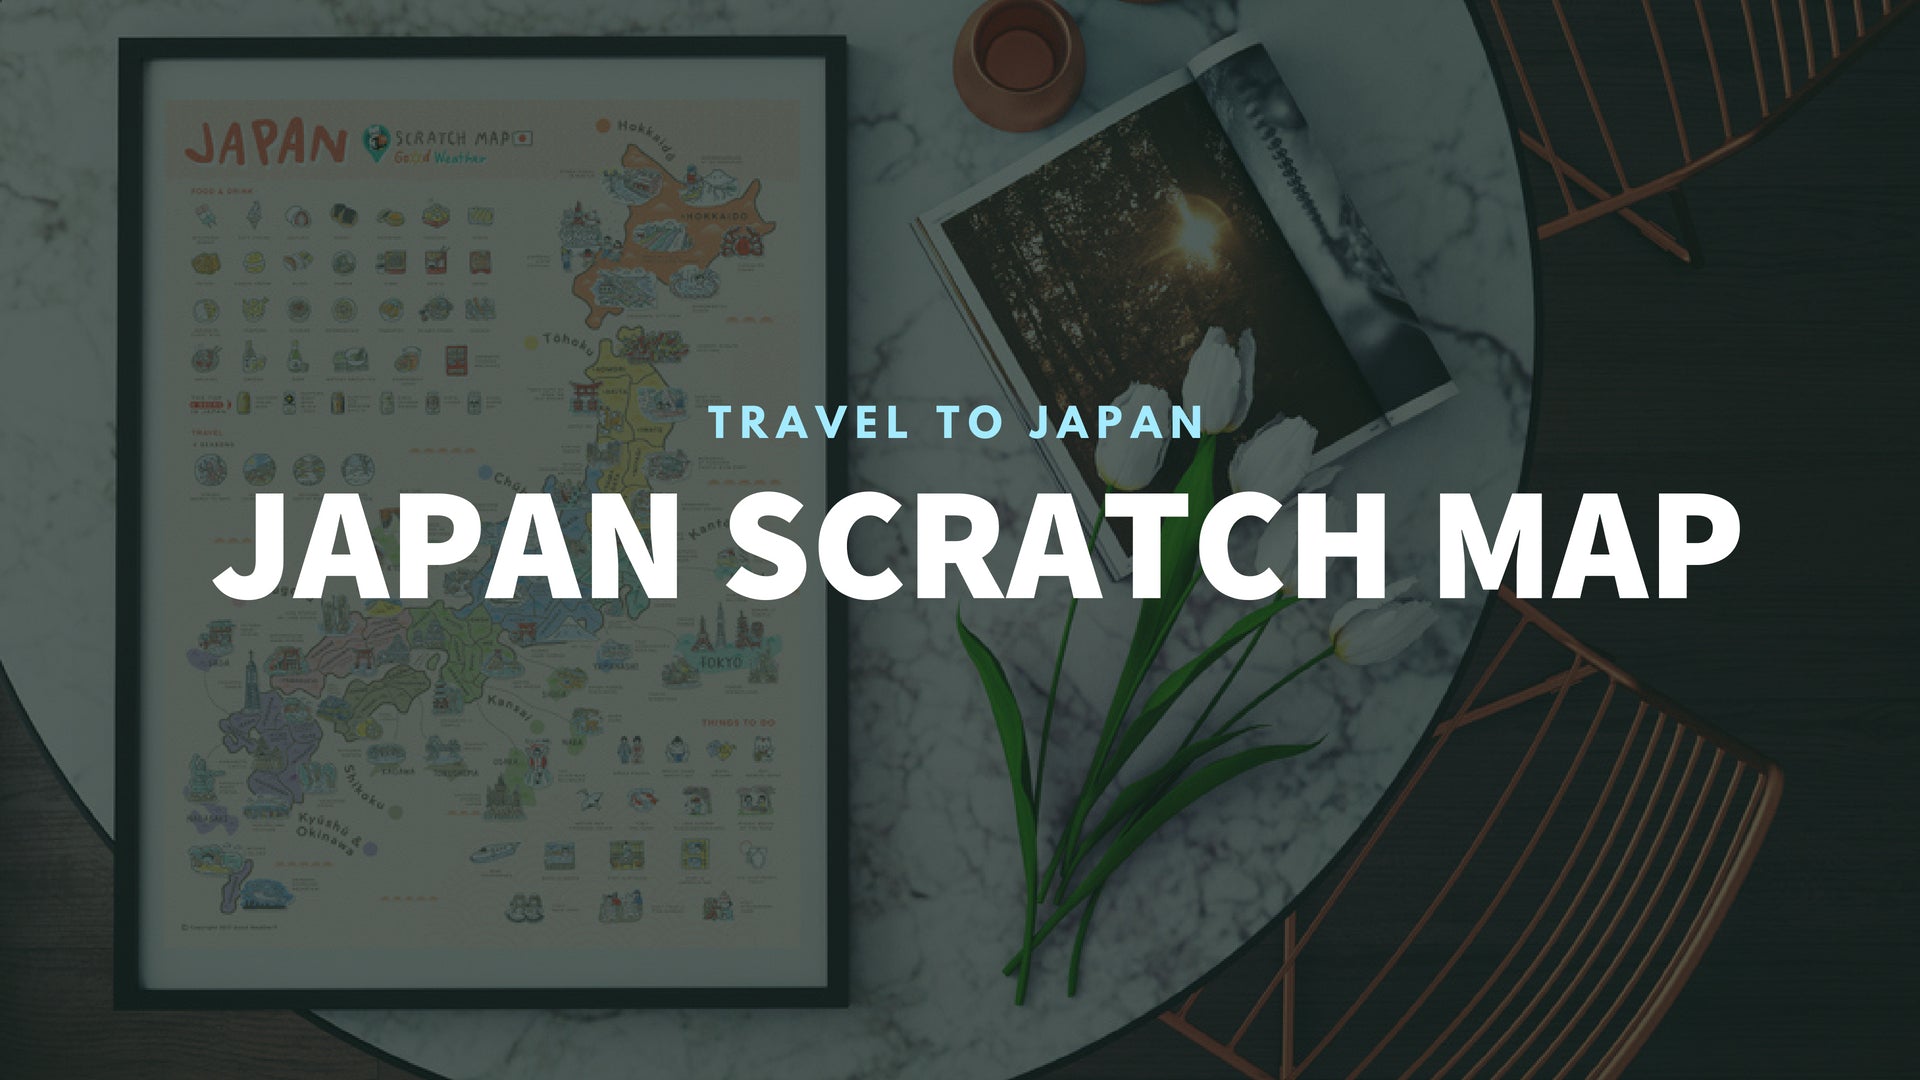 Good Weather Japan Scratch Travel Map Travel to Japan deluxe luckies world travel map with pins europe uk rosegold small personalised Scratch Off Traveling Japan travelization 日本 刮刮地圖 刮刮樂 世界地圖 banner - GadgetiCloud